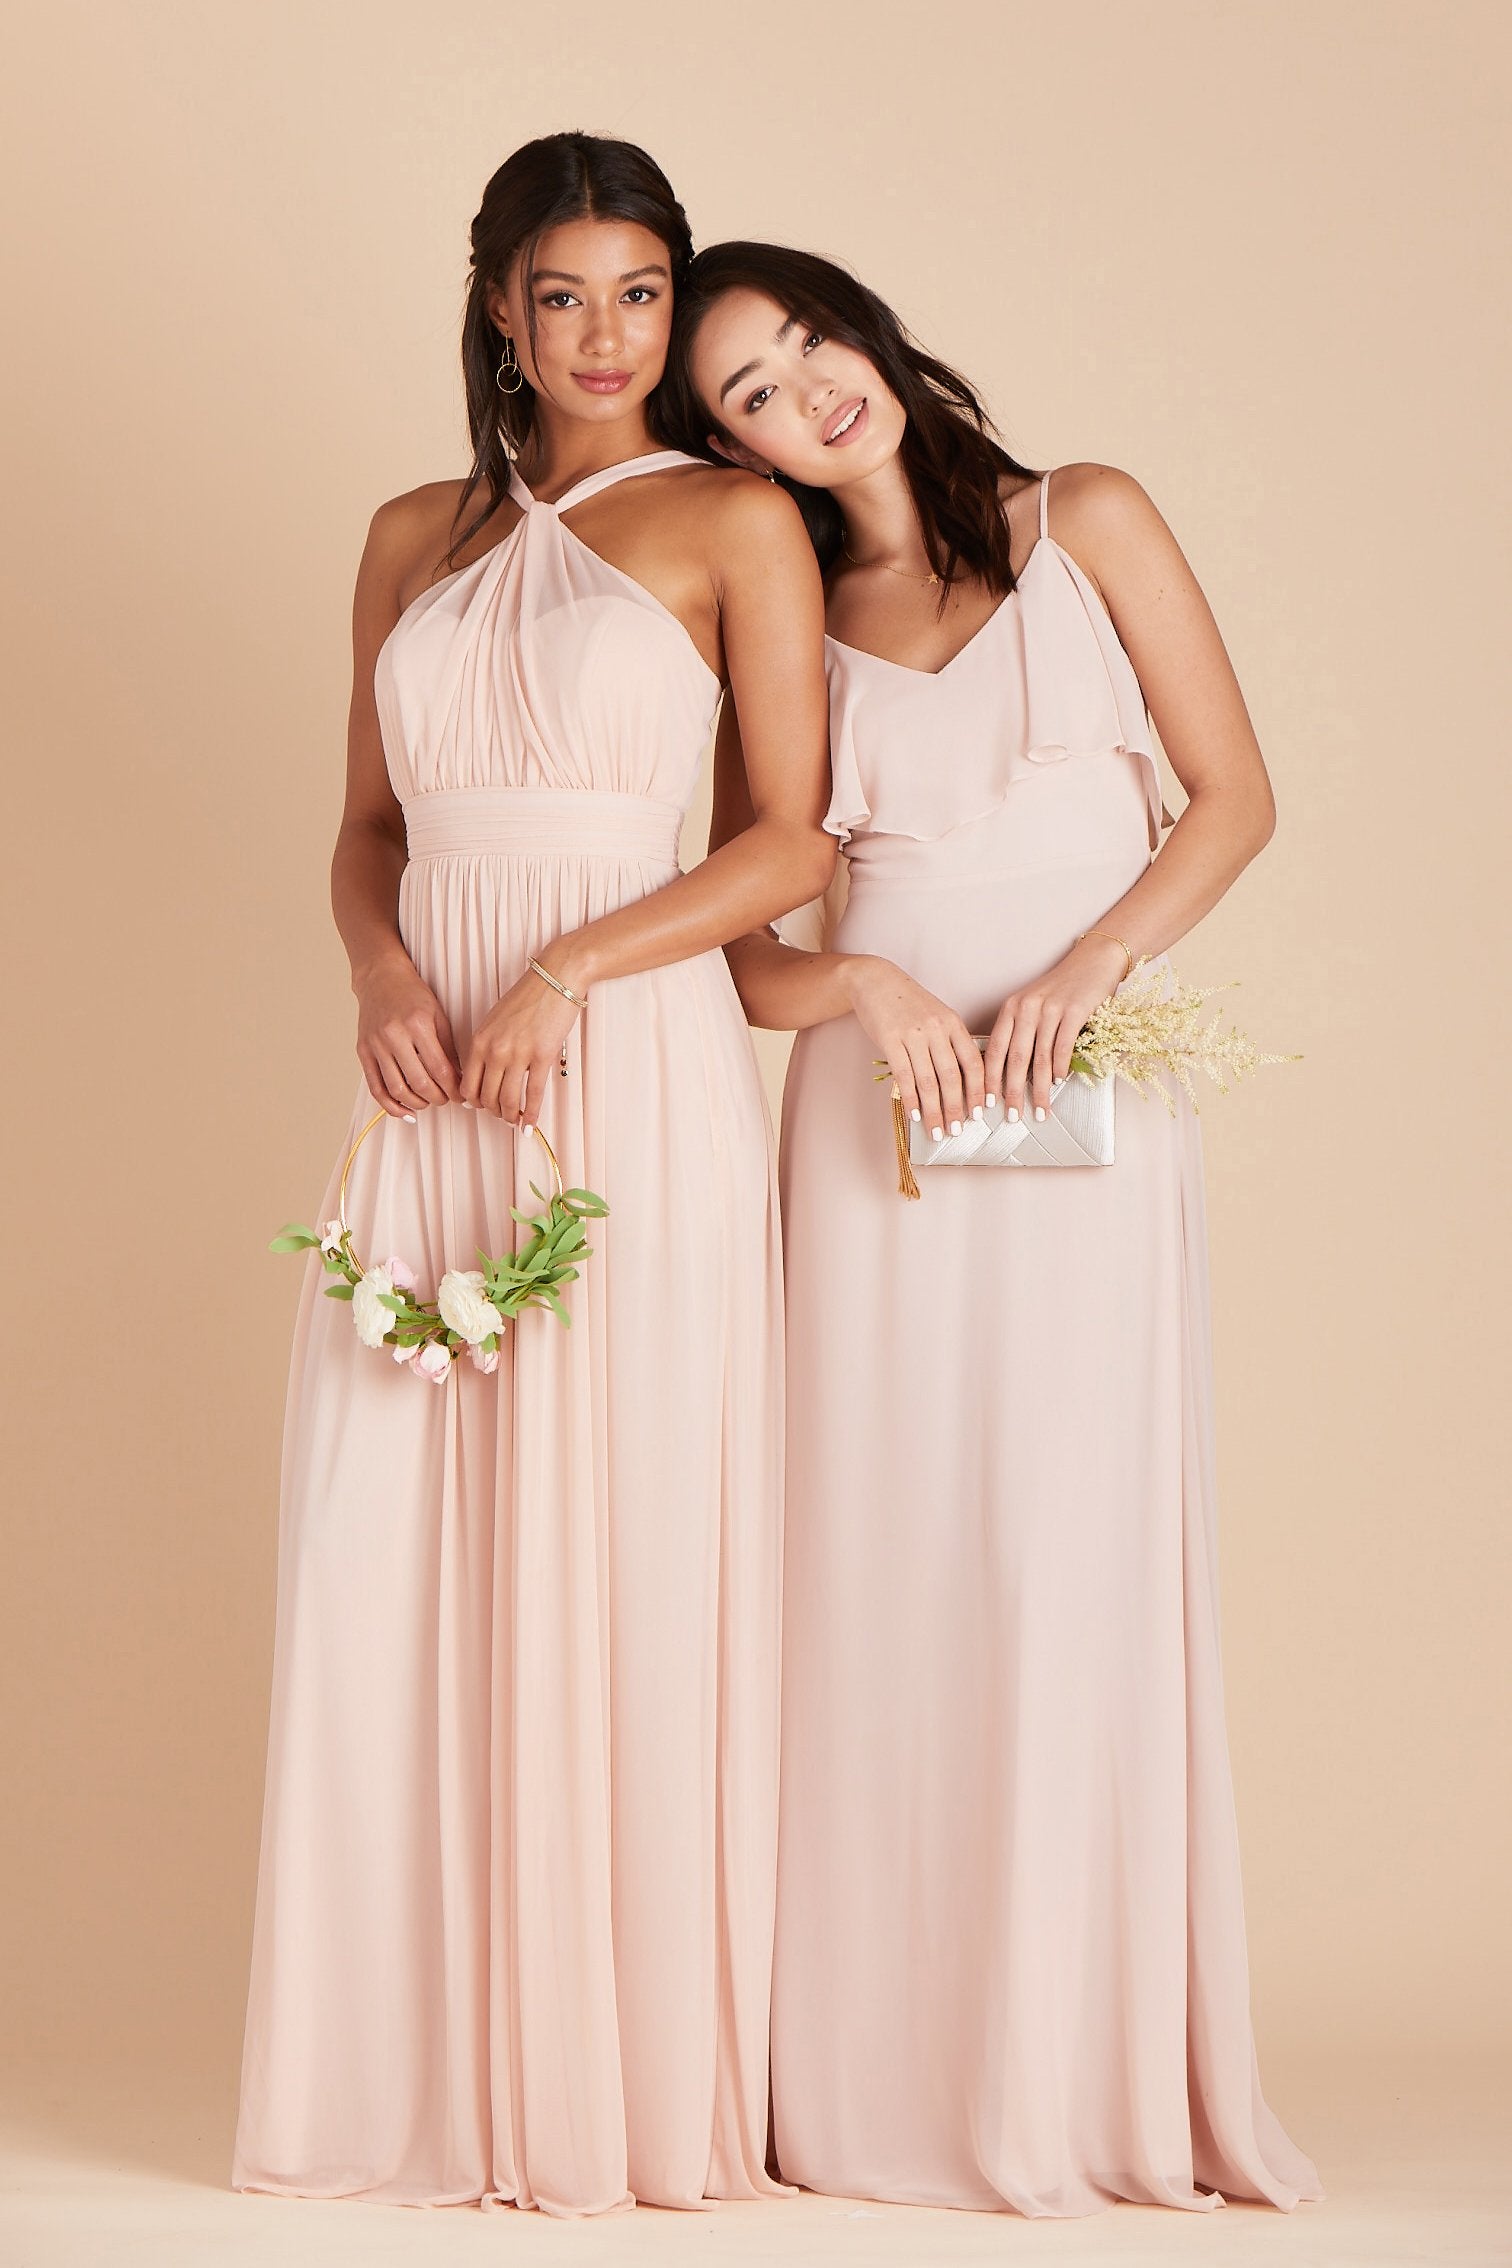 Jane convertible bridesmaid dress in pale blush chiffon by Birdy Grey, front view